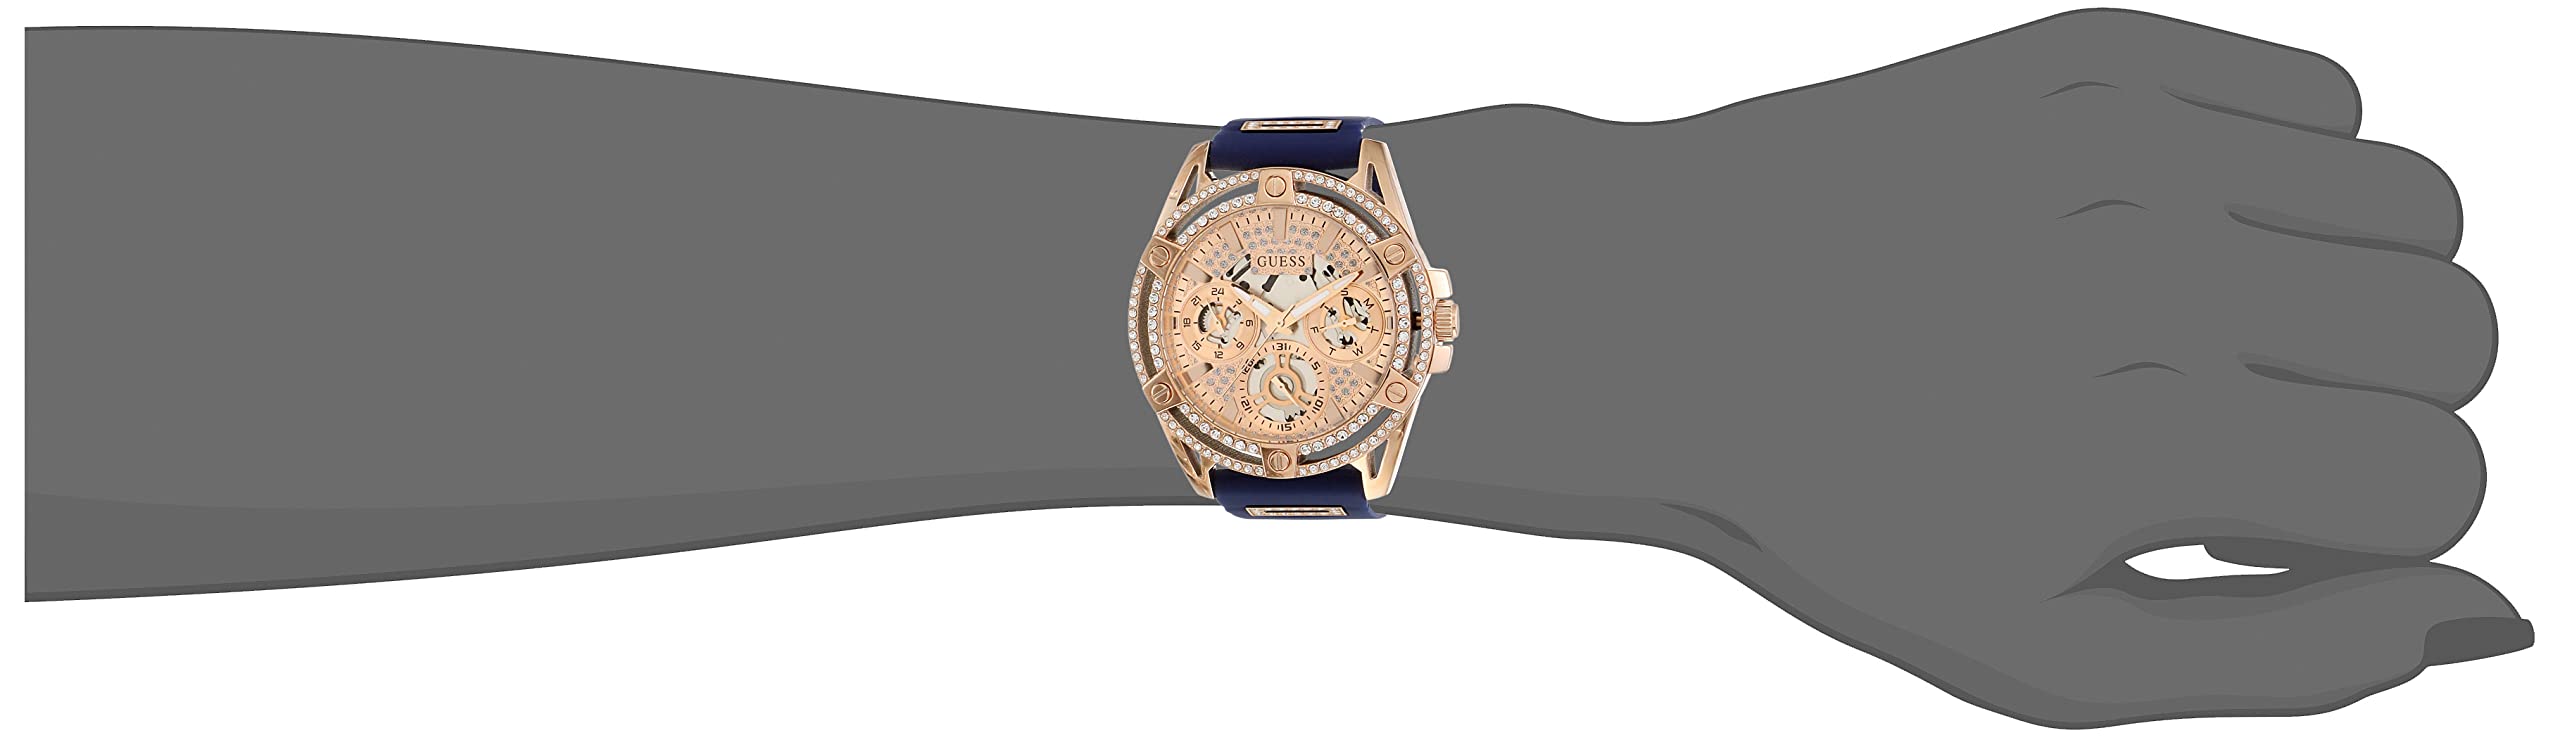 GUESS Ladies 40mm Watch - Blue Strap Rose Gold Dial Rose Gold Tone Case